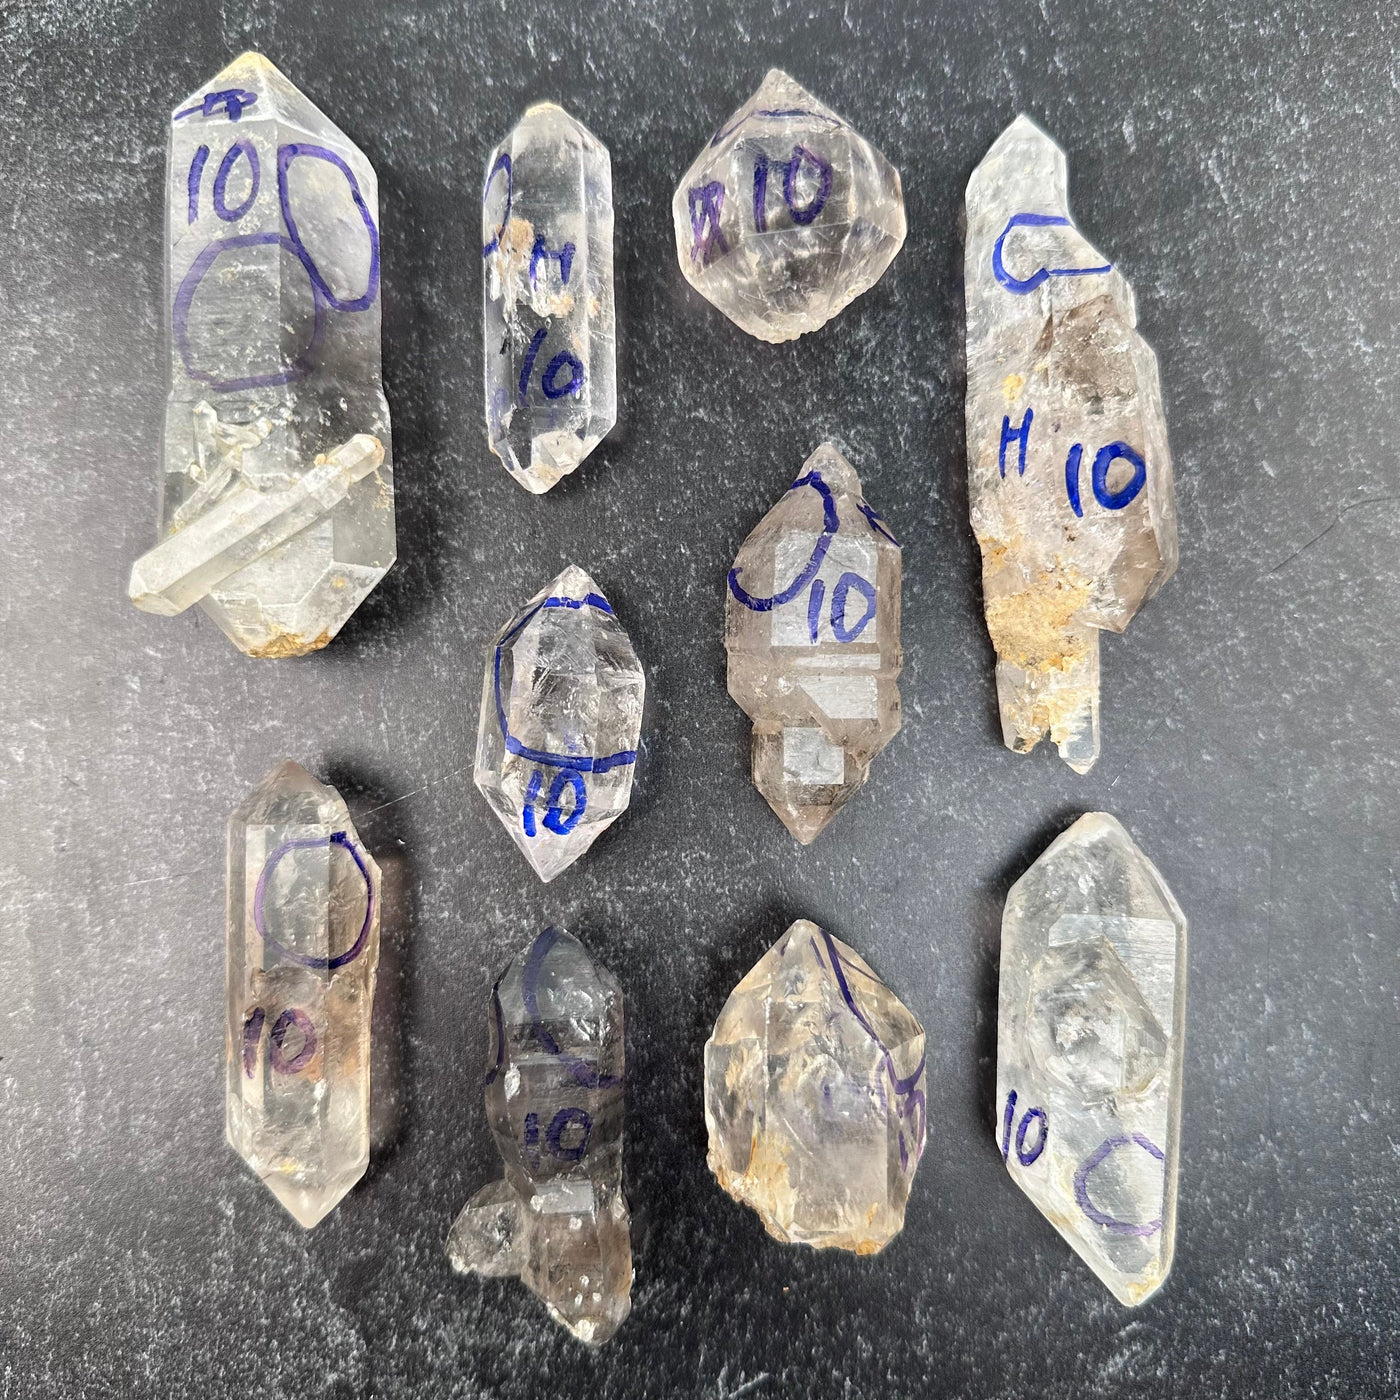 multiple crystals displayed to show the differences in the sizes. grade #10